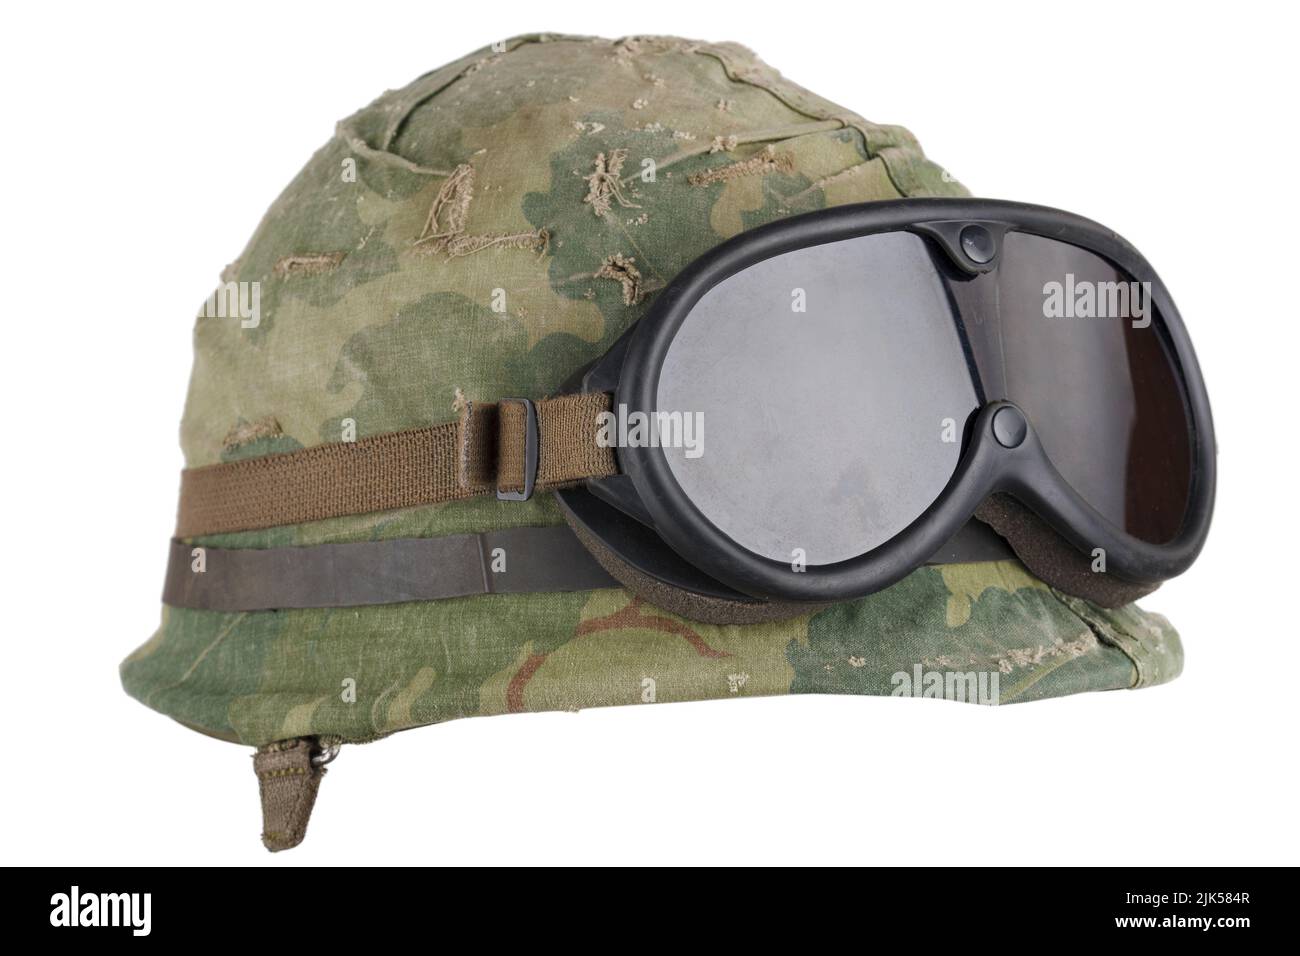 US Army helmet Vietnam war period with camouflage cover goggles isolated on white Stock Photo